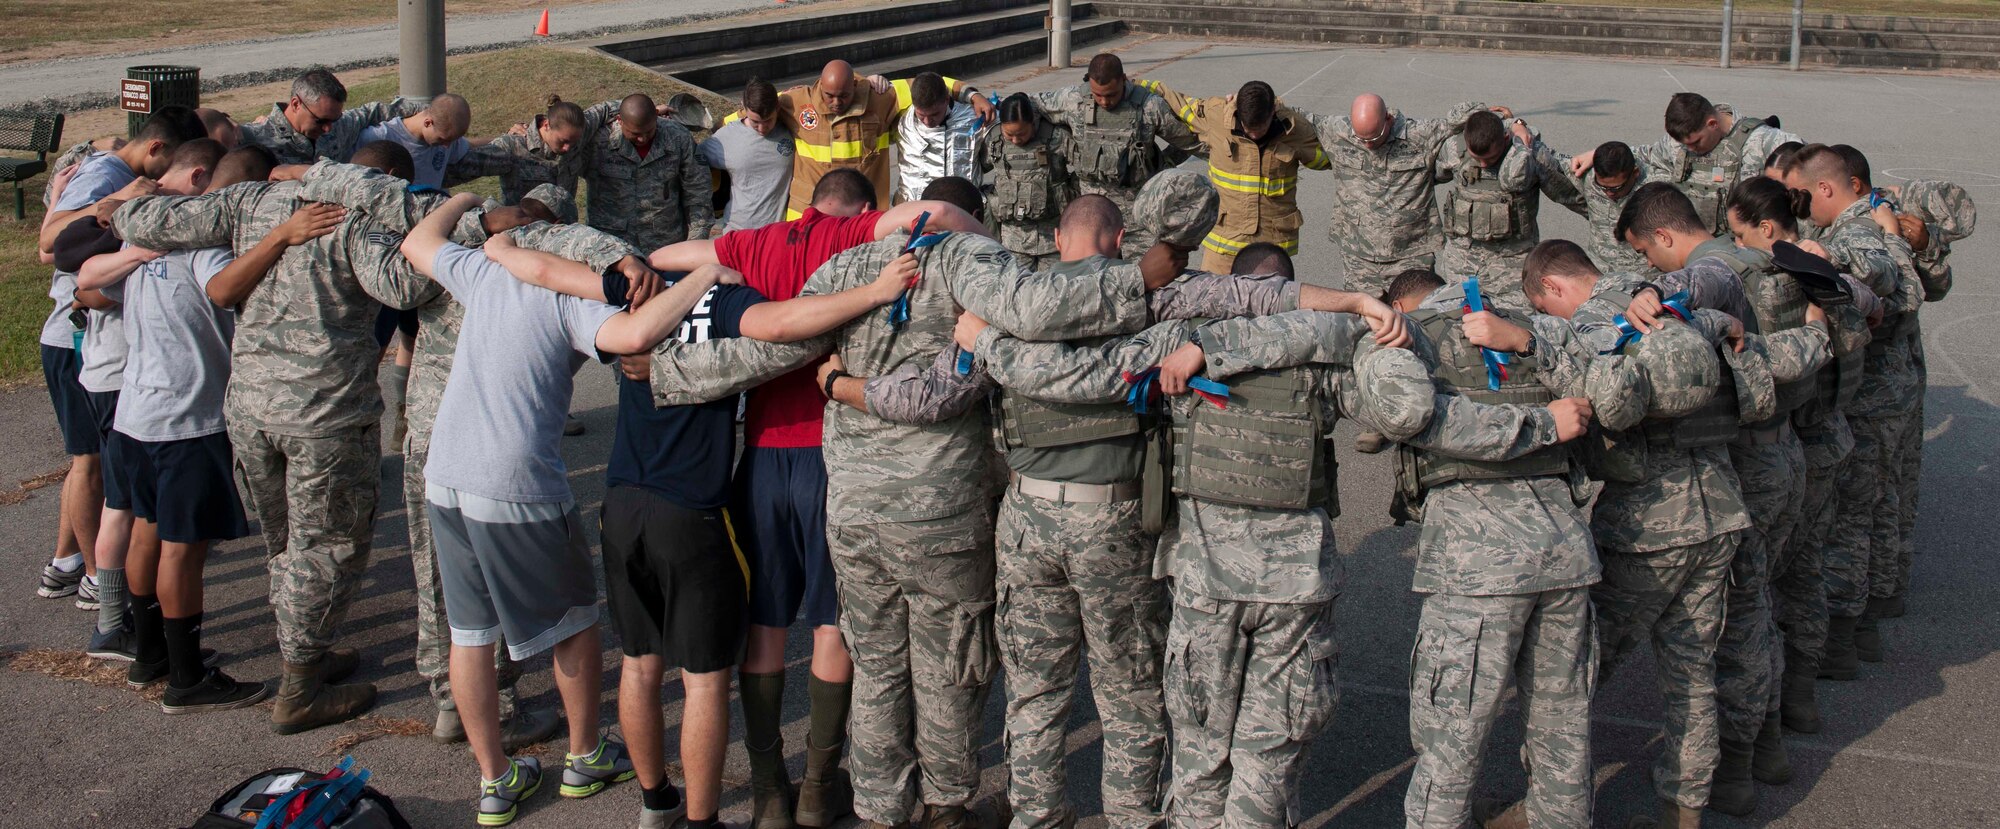 Members of the 8th Fighter Wing participate in  stair climb in remembrance of 9/11 at Kunsan Air Base, Republic of Korea, September 11, 2015. Airmen climb these steps to simulate the 110 stories that first responders climbed and to honor the memory of 343 individuals that made the ultimate sacrifice ultimate sacrifice, September 11, 2001. (U.S. Air Force photo by SrA Dustin King/Released)